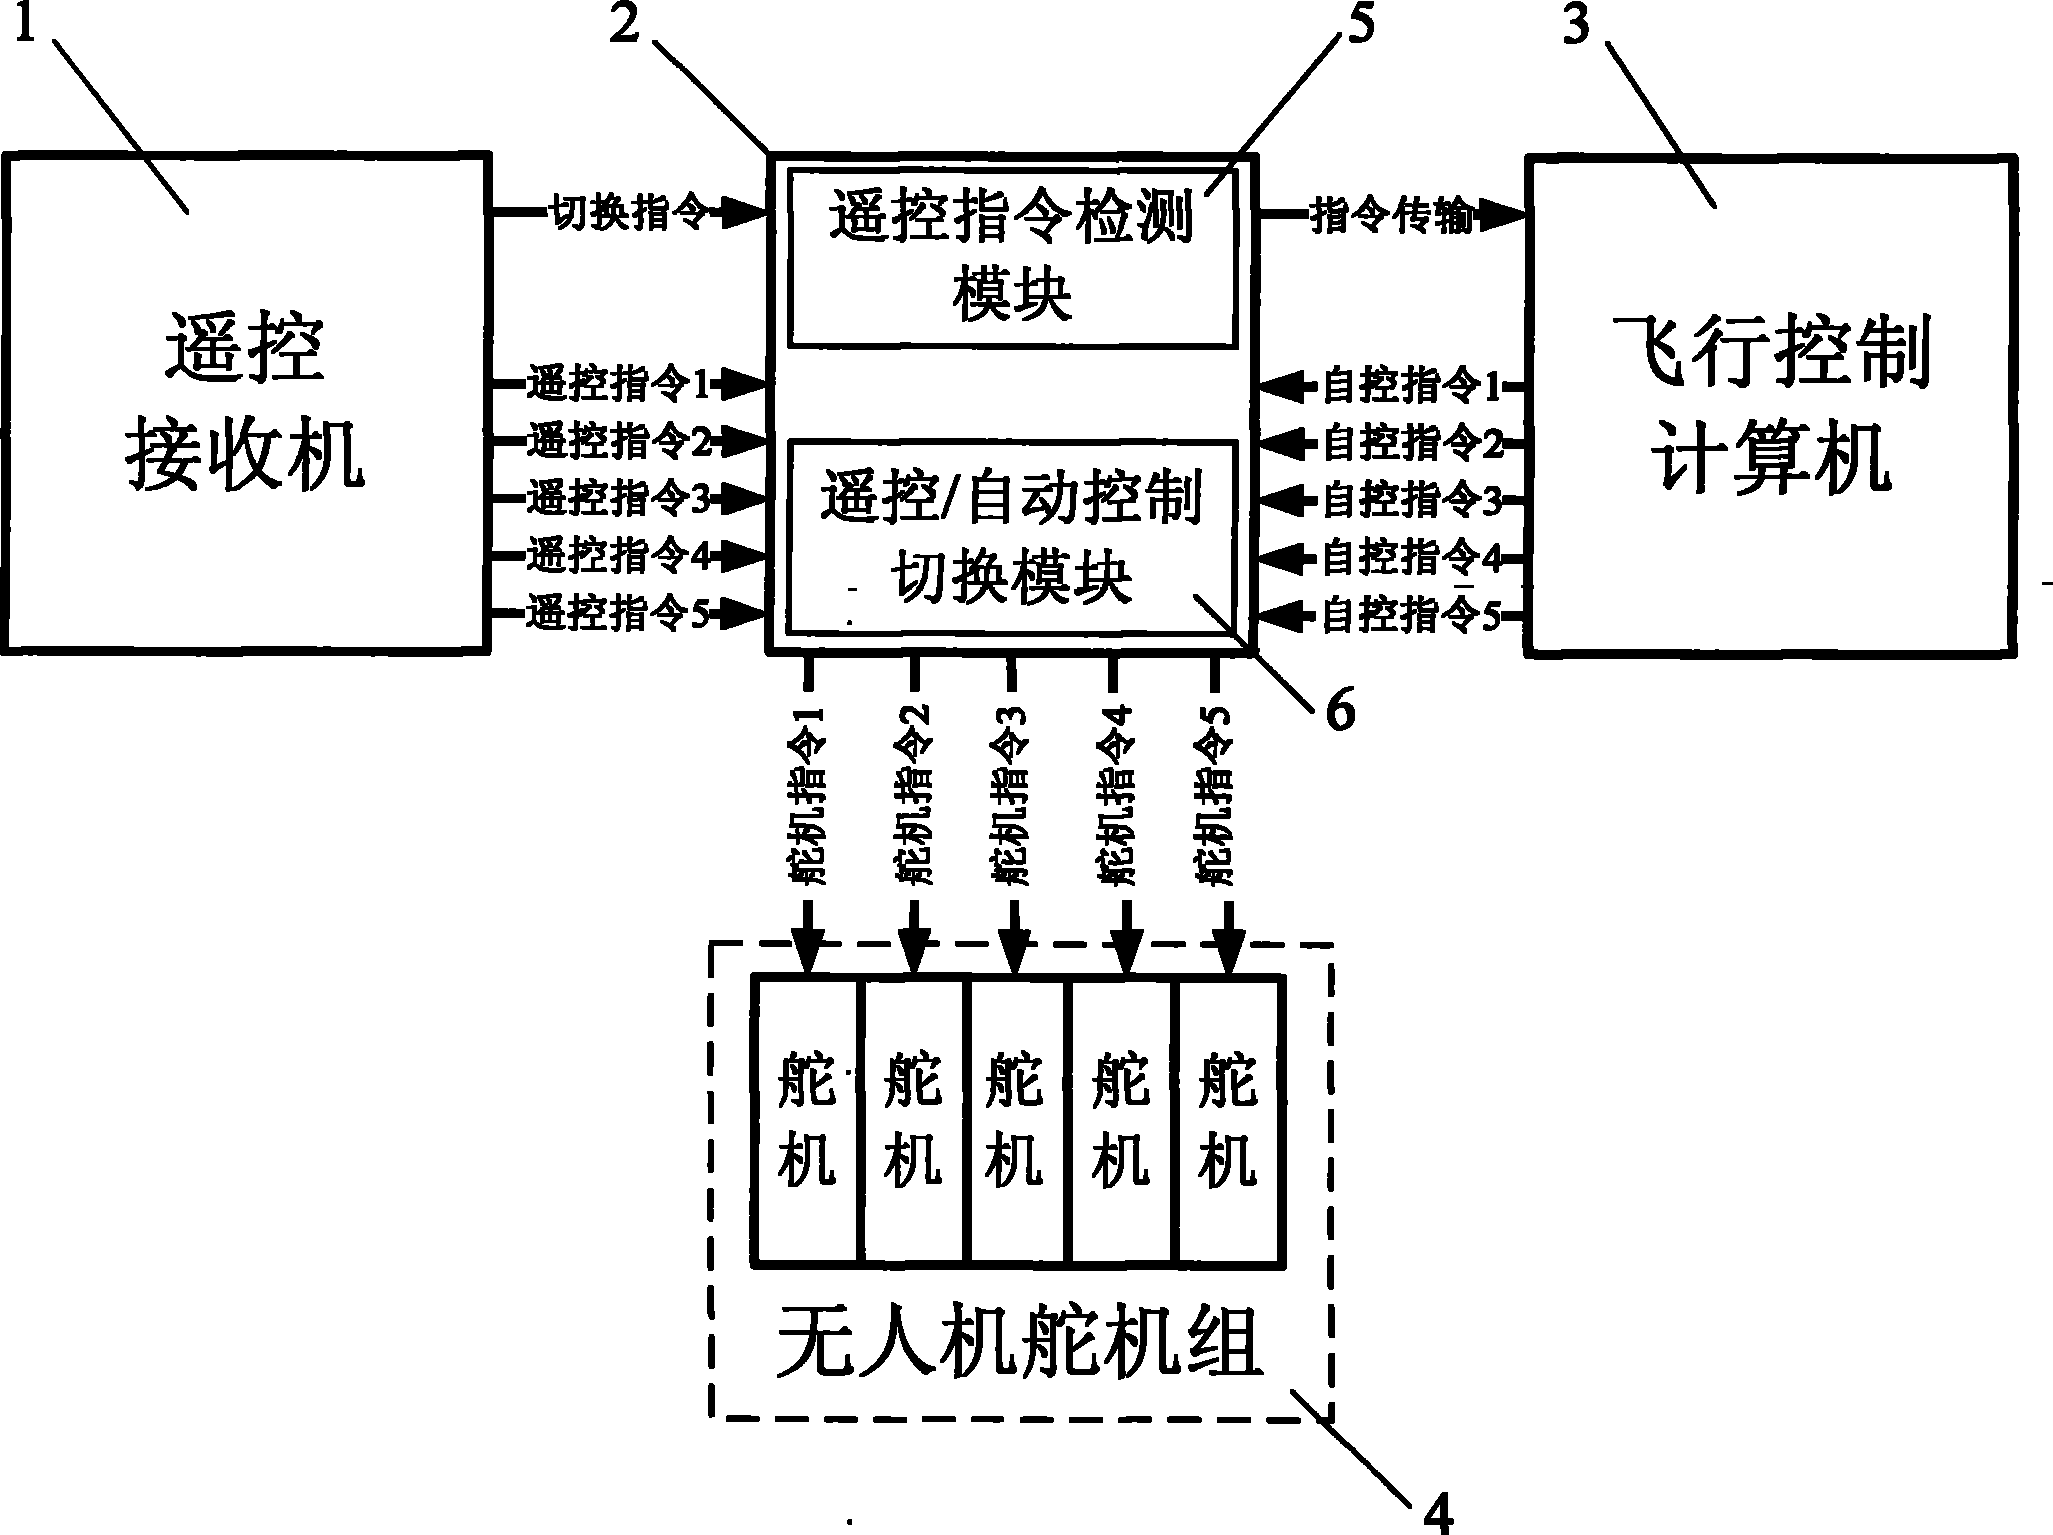 Automatic control and remote control switching system of unmanned aerial vehicle